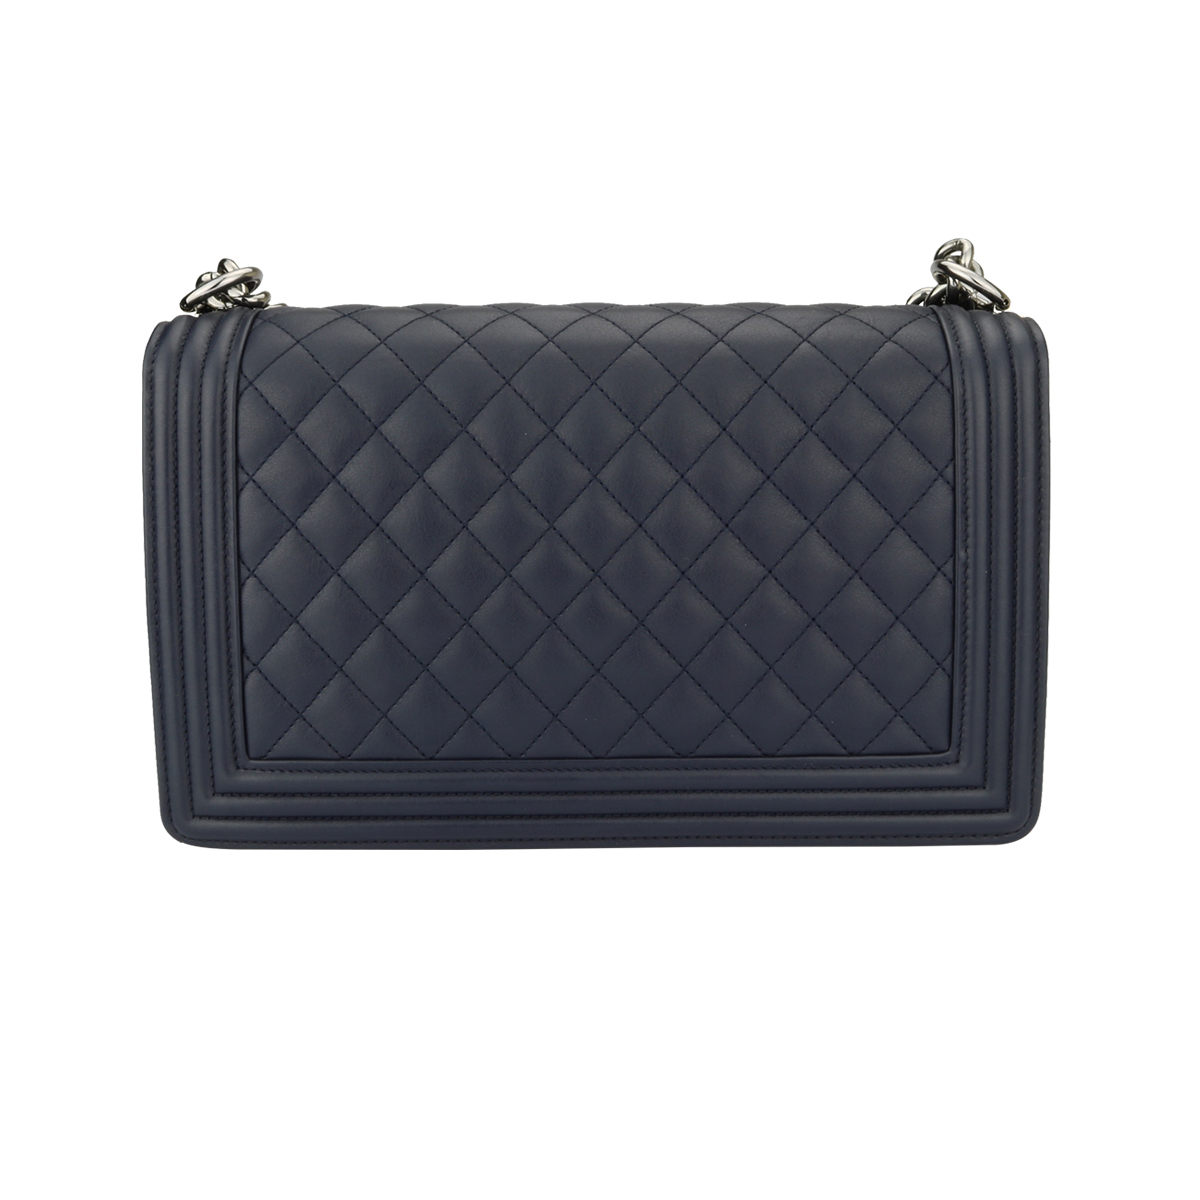 Chanel GHW Dark Navy Blue Quilted Lambskin Small Double Flap Bag 6C26a 